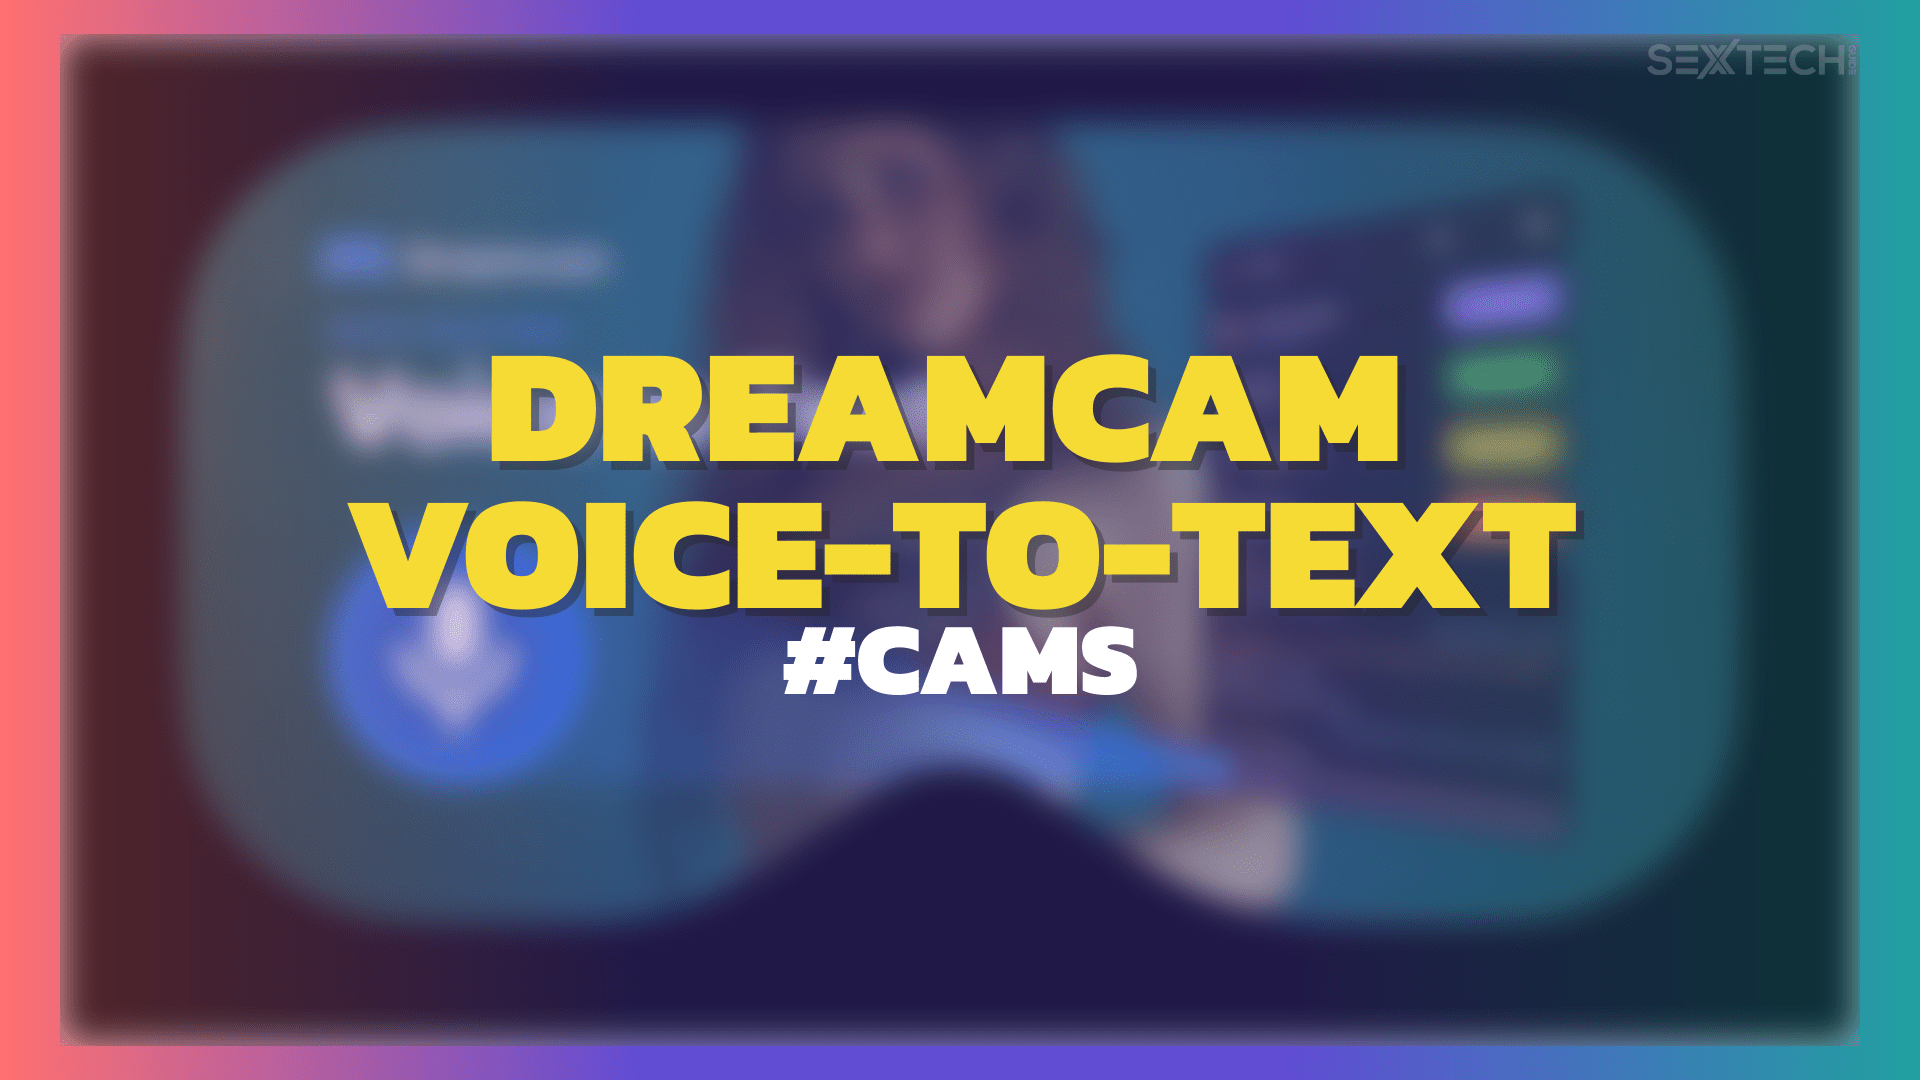 DreamCam Voice-2-Text Allows for Handsfree VR Messaging